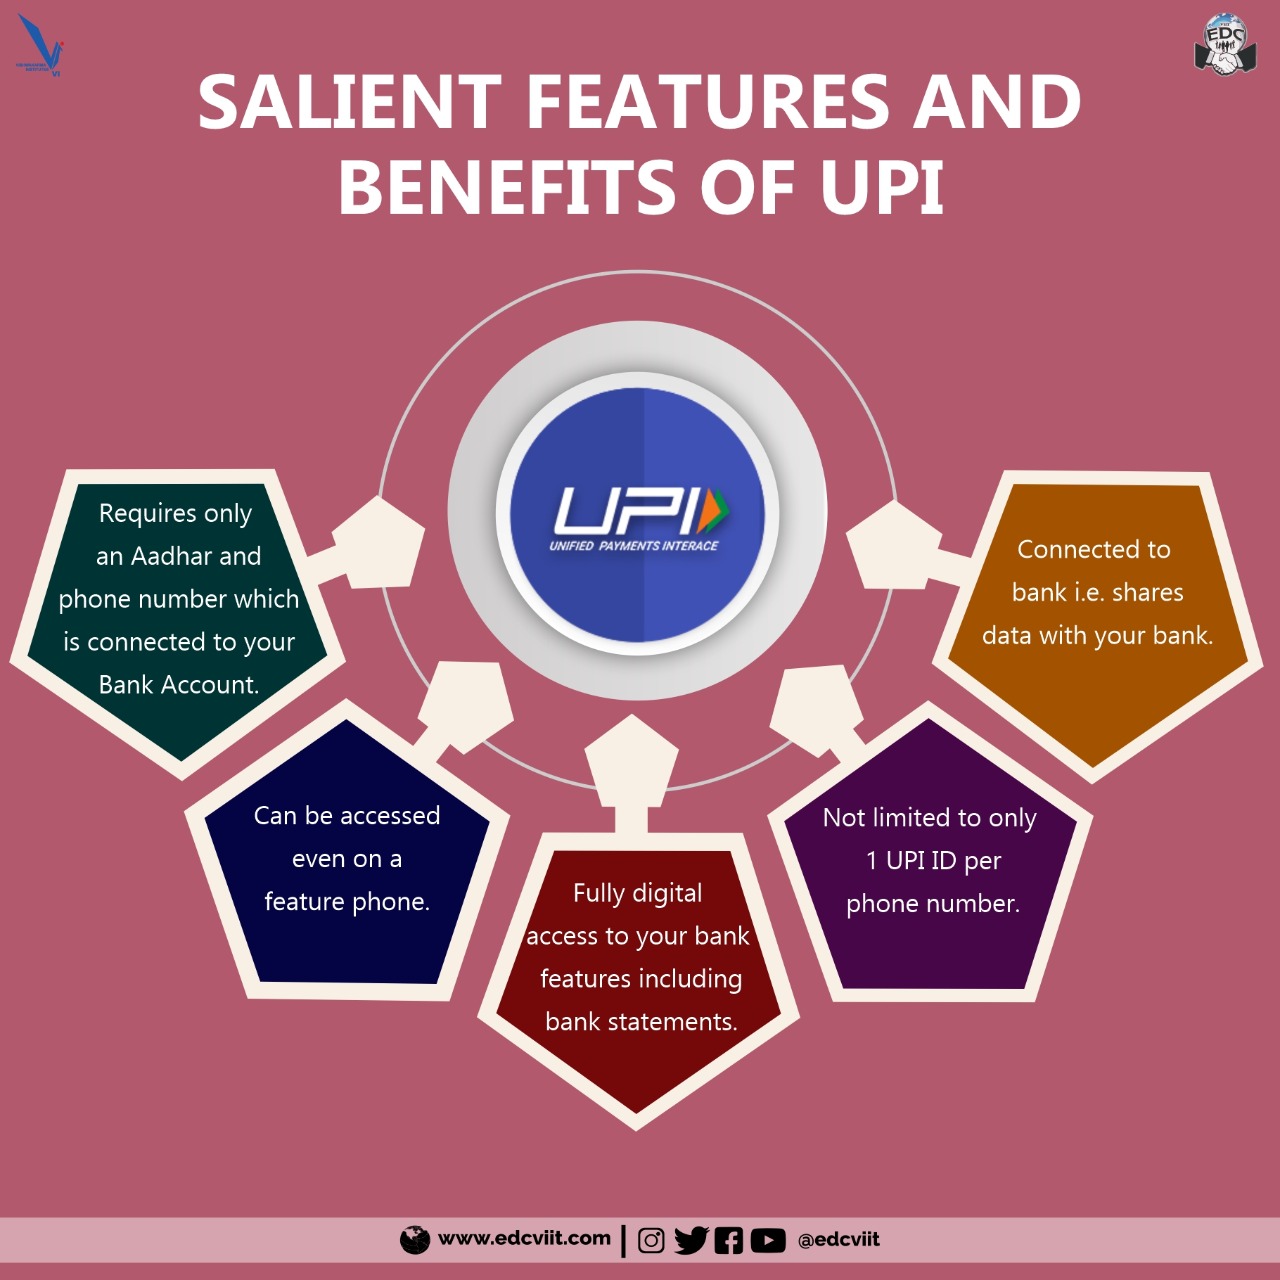 UPI - UNIFIED PAYMENT INTERFACE